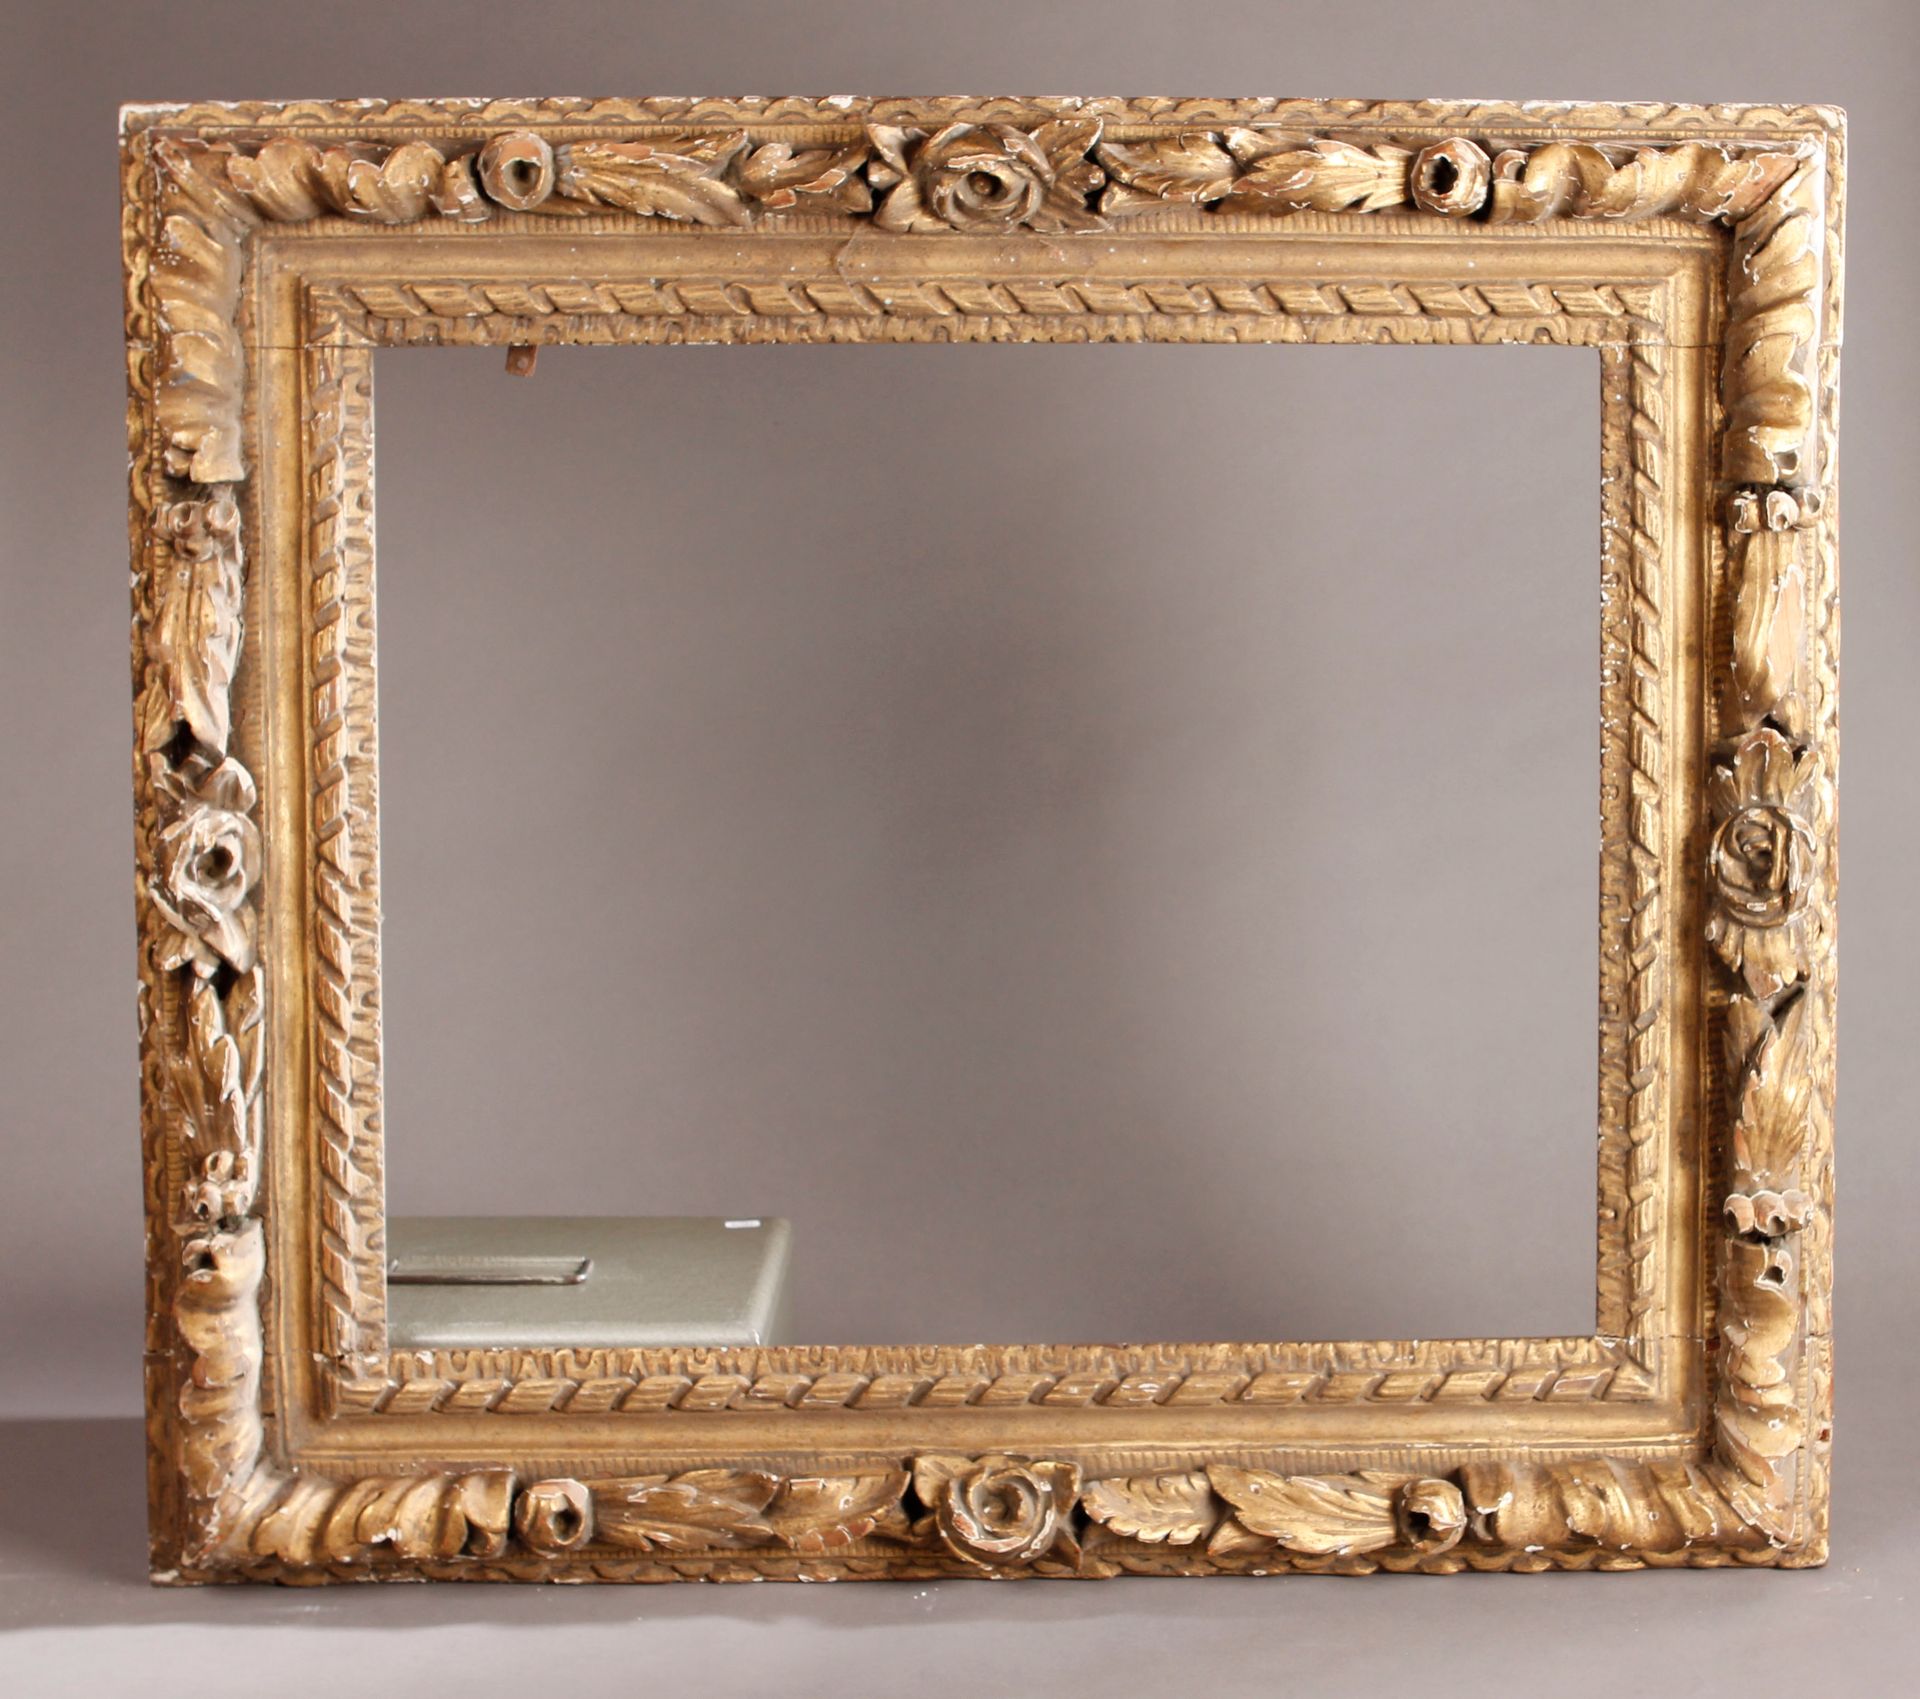 Null Gilded wood frame carved with foliage, flowers, and ribbon.
Louis XVI style&hellip;